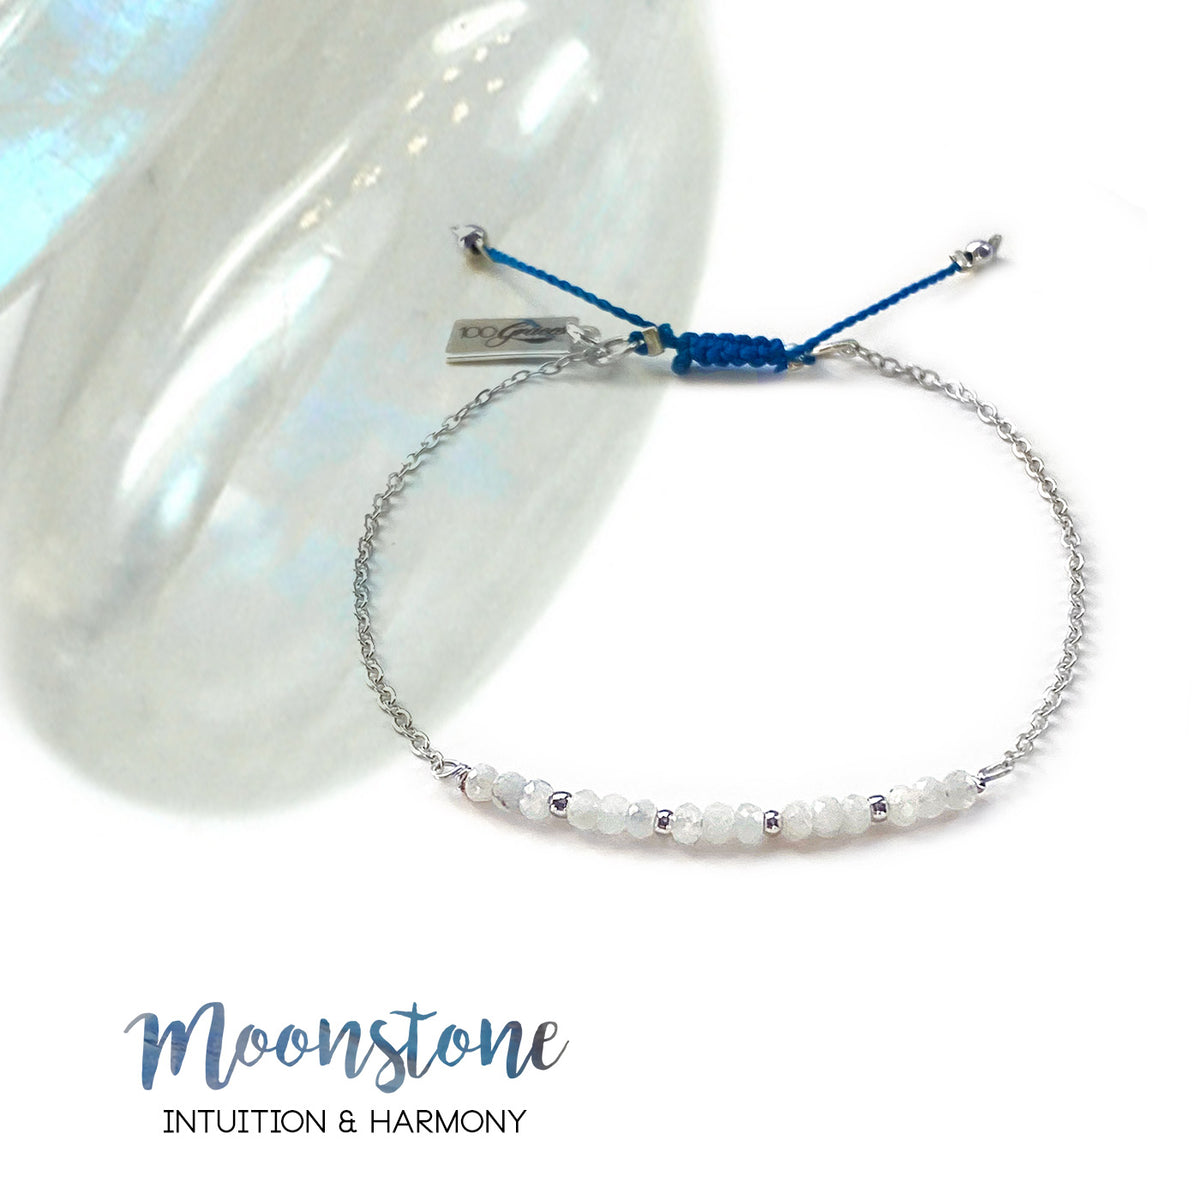 Moonstone: Stone of Harmony and Intuition